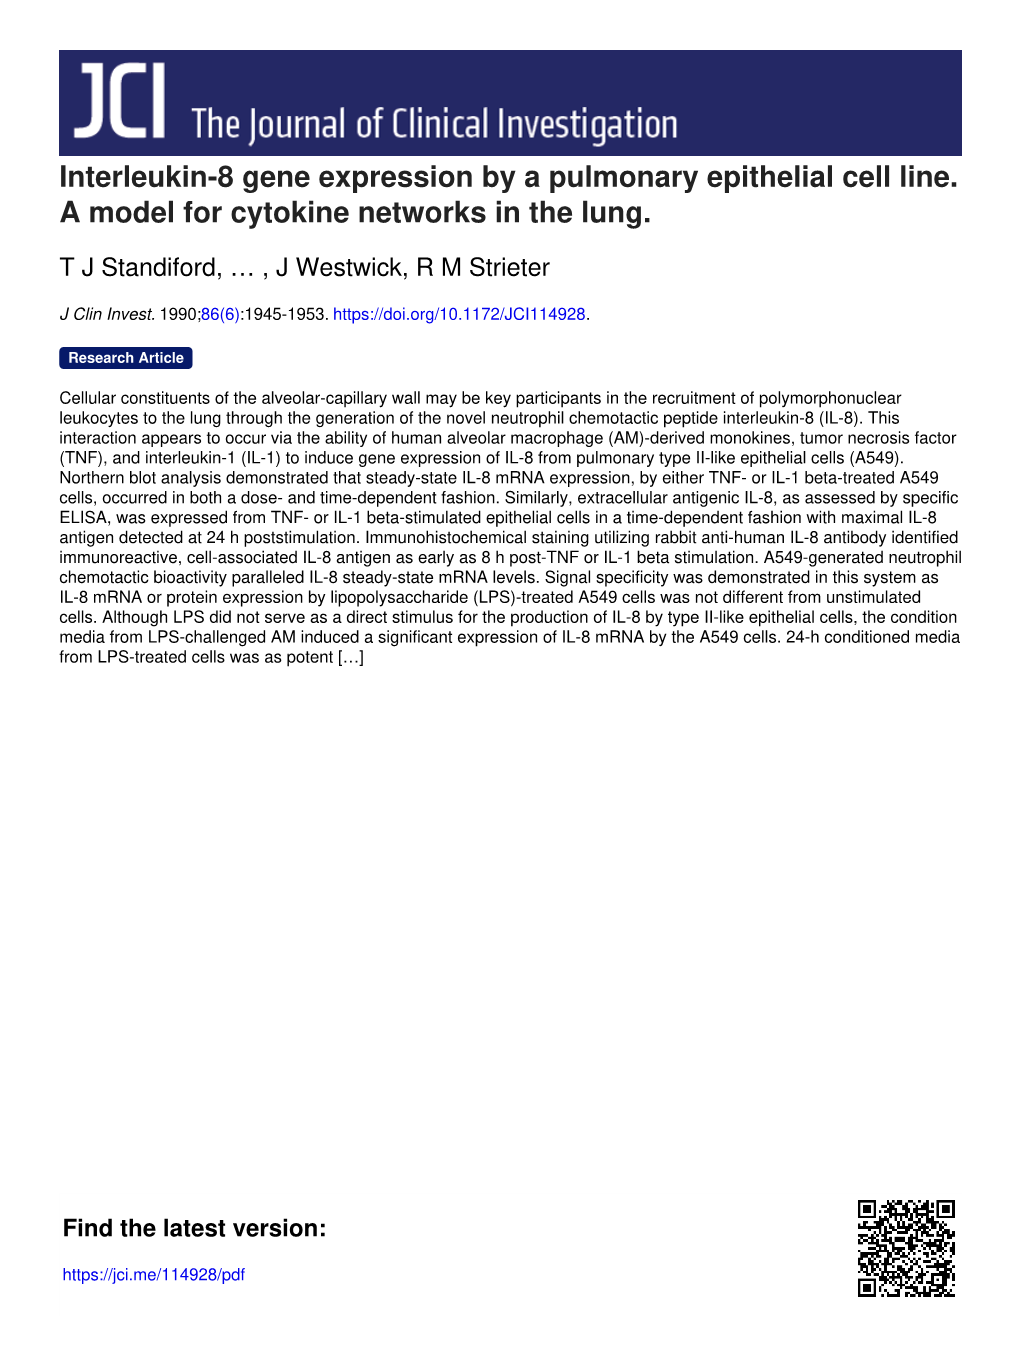 Interleukin-8 Gene Expression by a Pulmonary Epithelial Cell Line. a Model for Cytokine Networks in the Lung